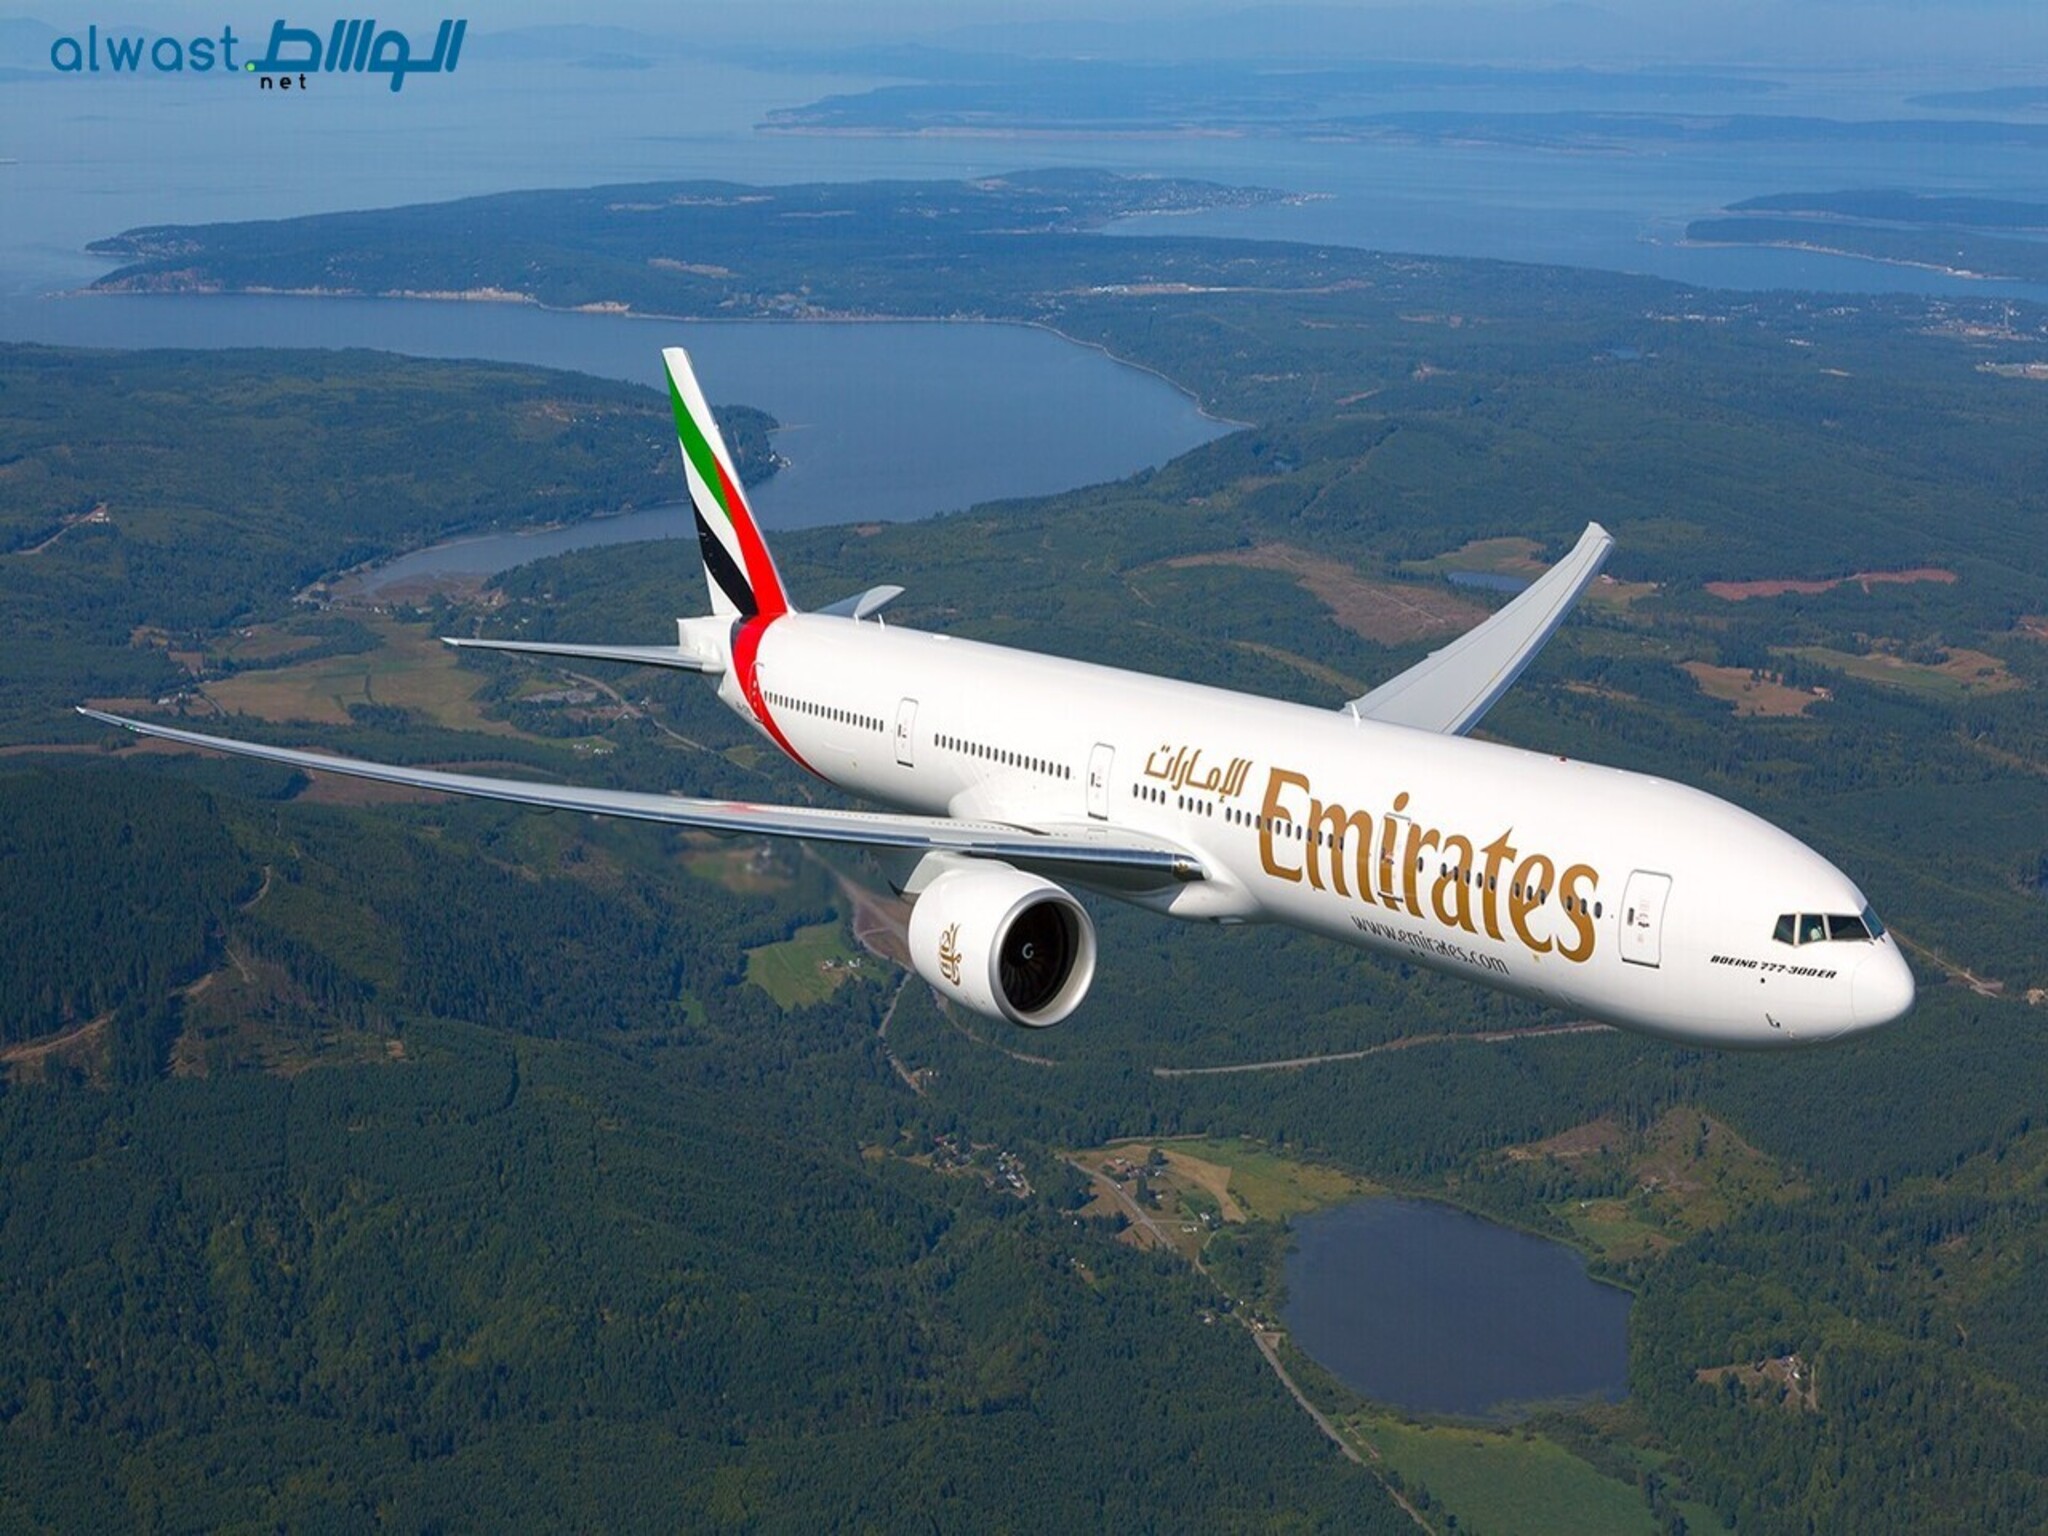 Emirates Airlines announces adding three weekly flights to Seoul